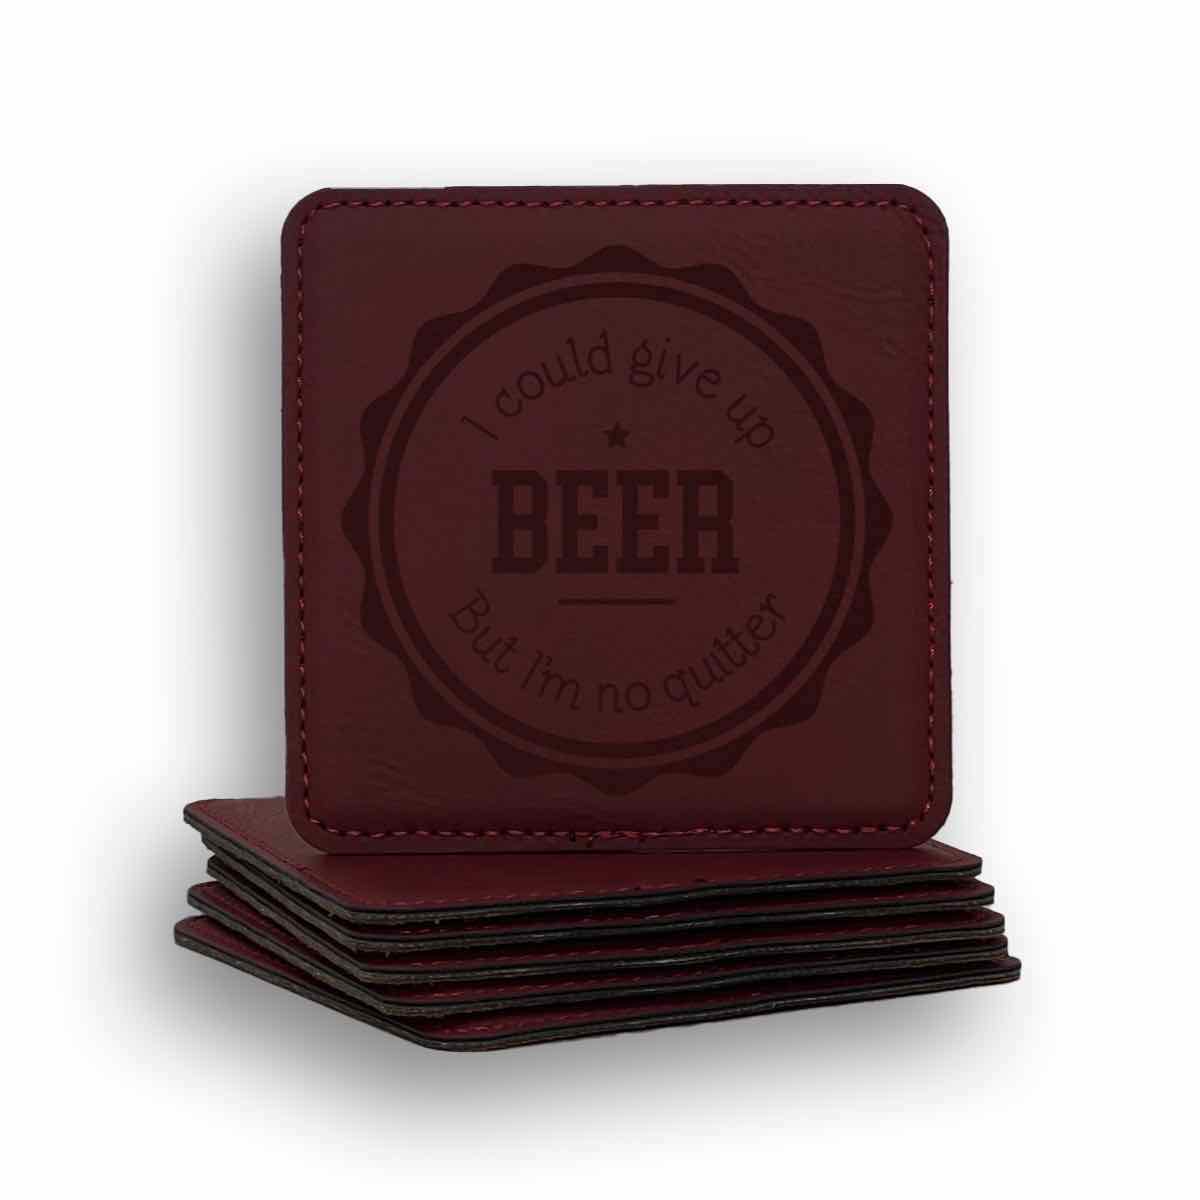 I Could Give Up Beer, But Im No Quitter Coaster